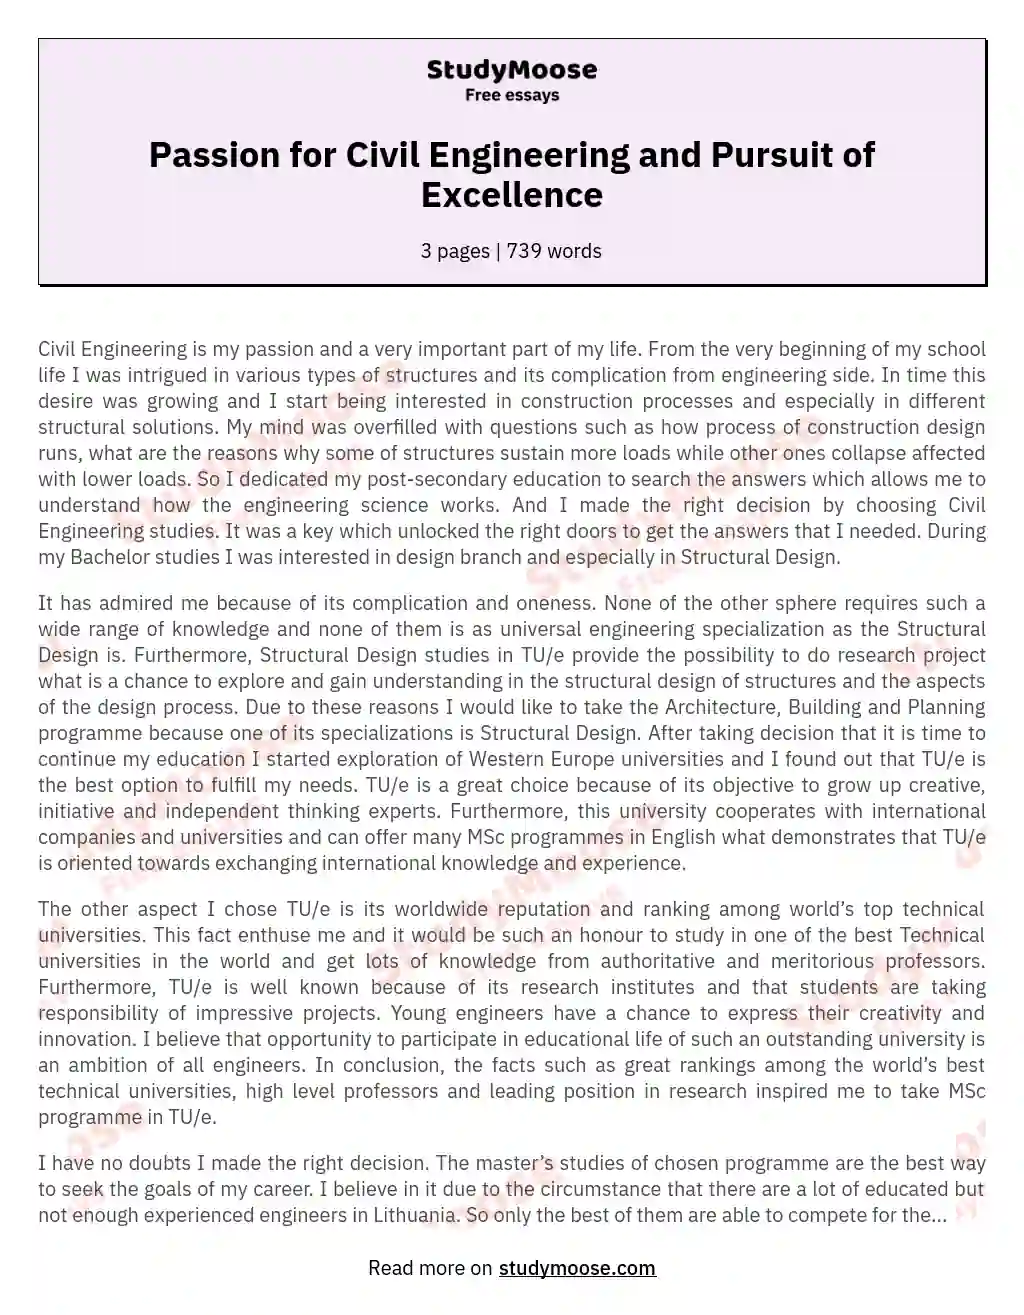 Passion for Civil Engineering and Pursuit of Excellence essay